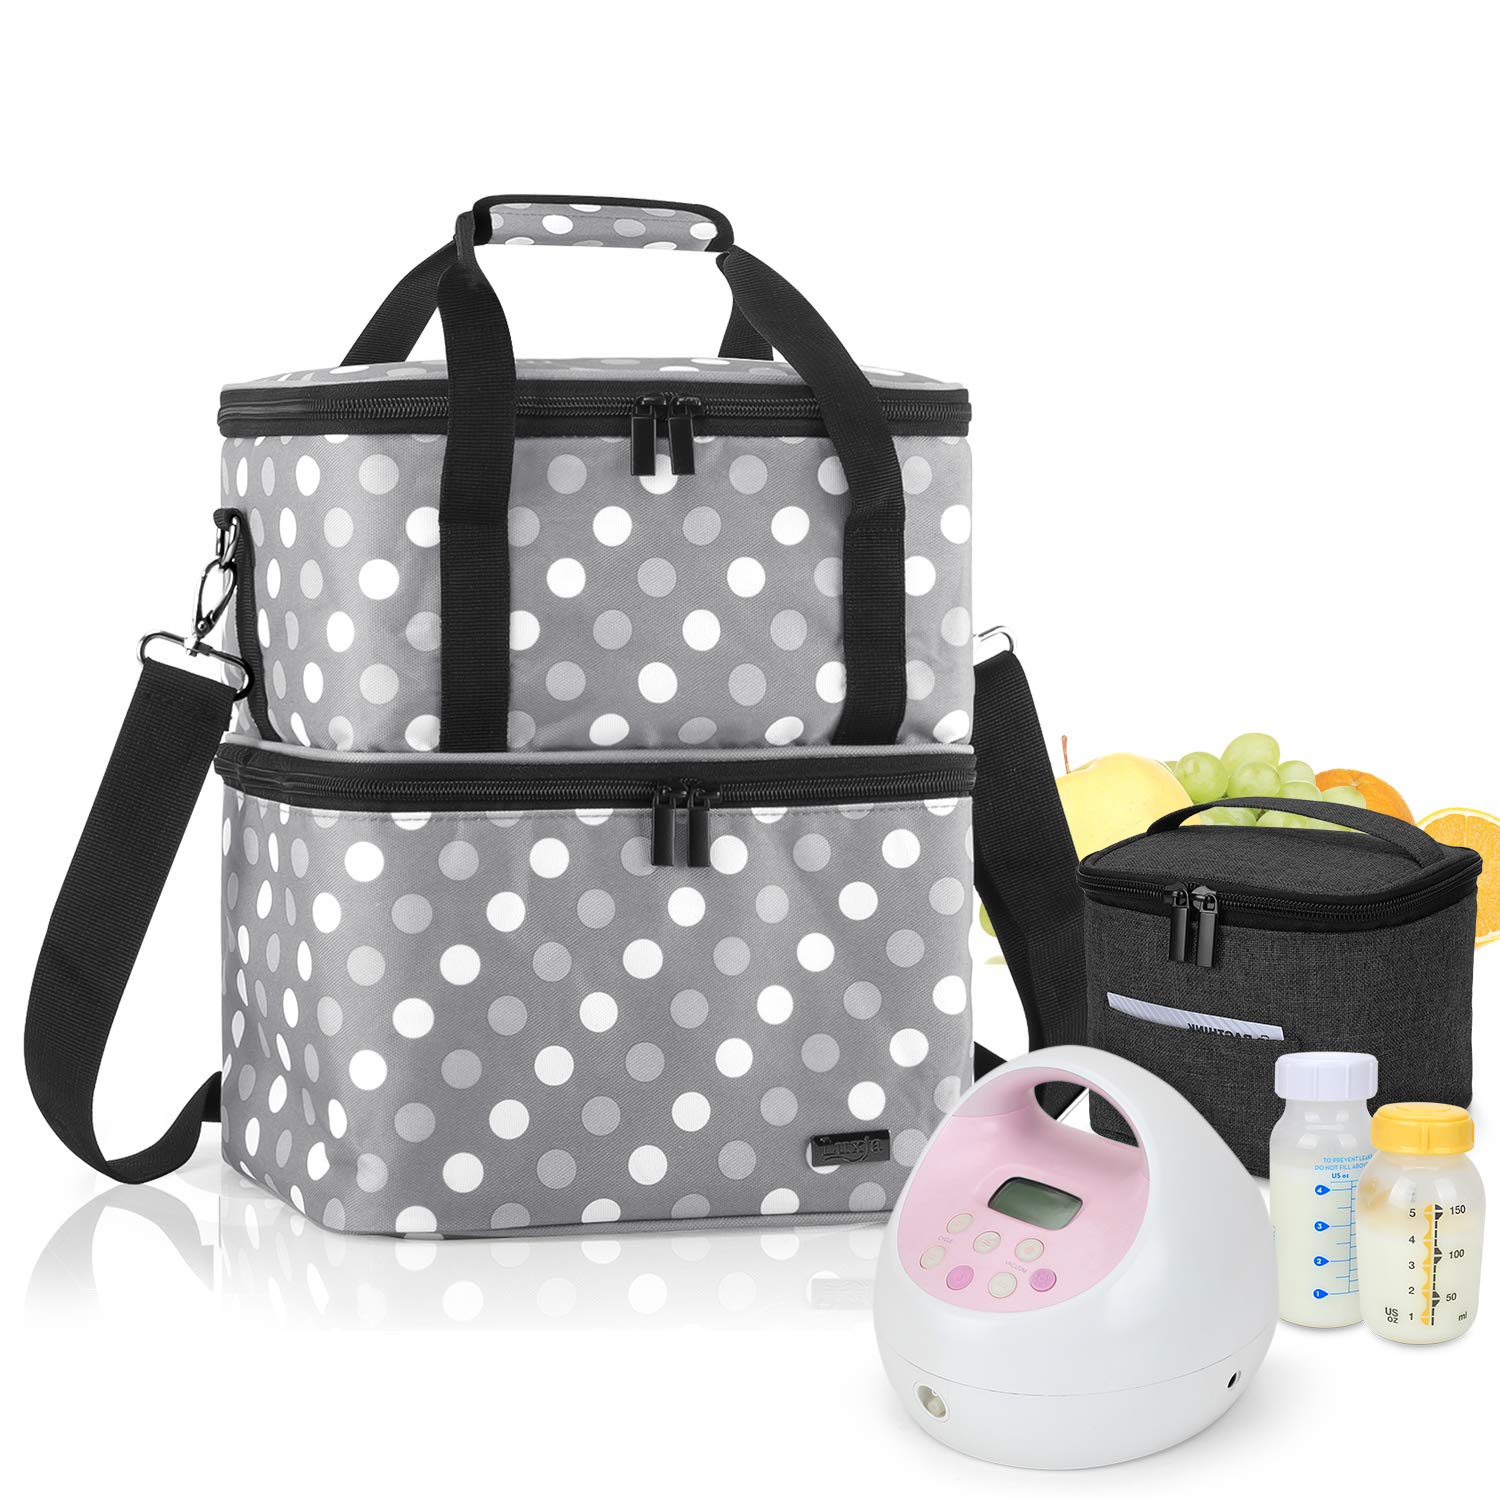 This insulated breast pump carrying bag keeps your milk cold for hours, making it perfect for on-the-go pumping.